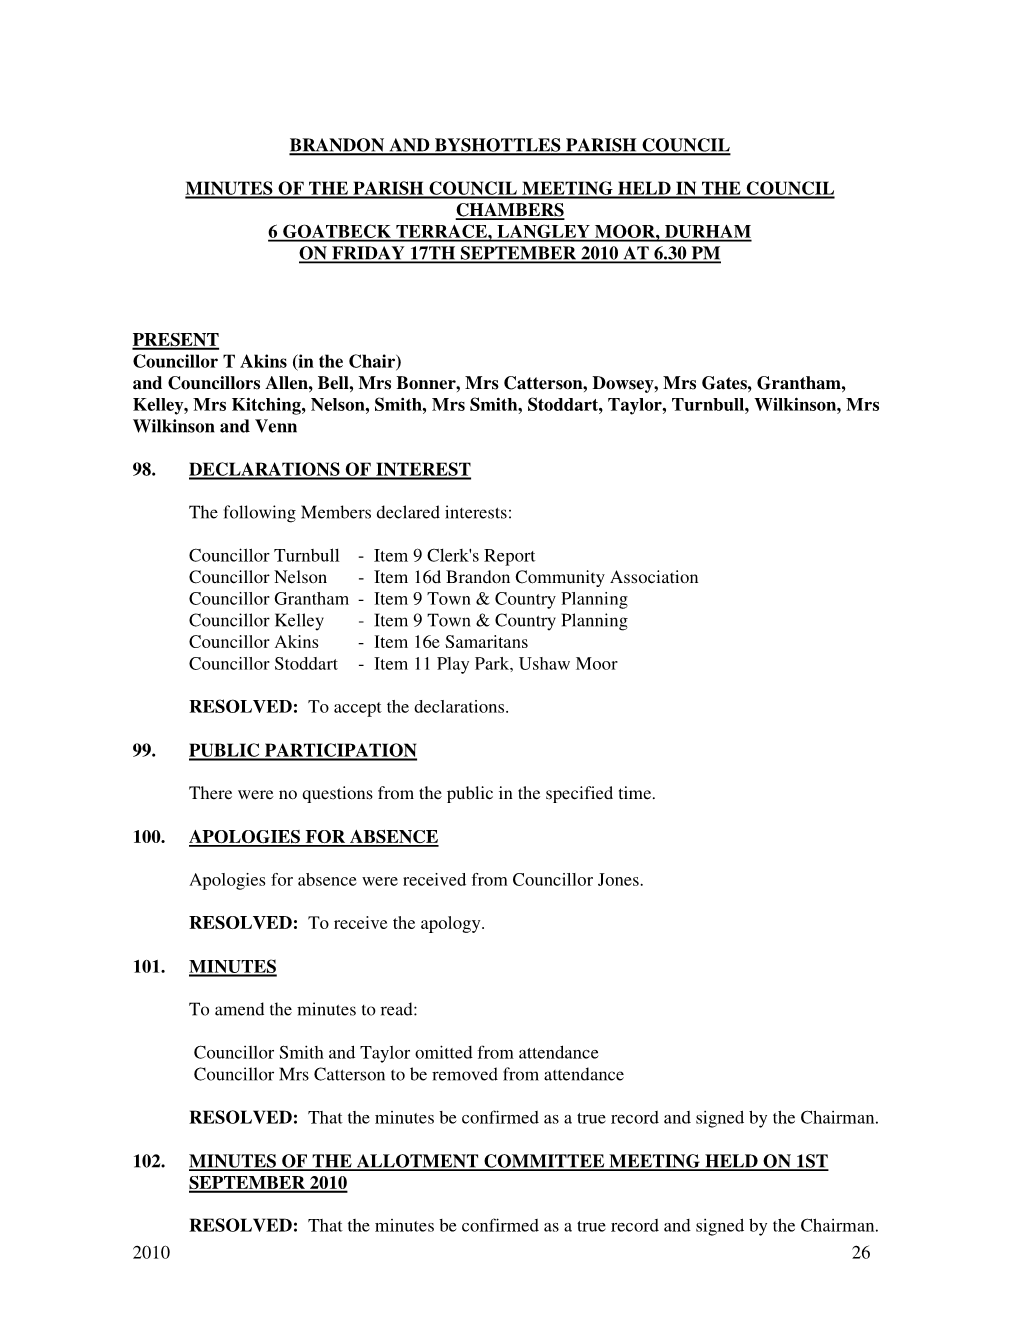 Brandon and Byshottles Parish Council Minutes Of